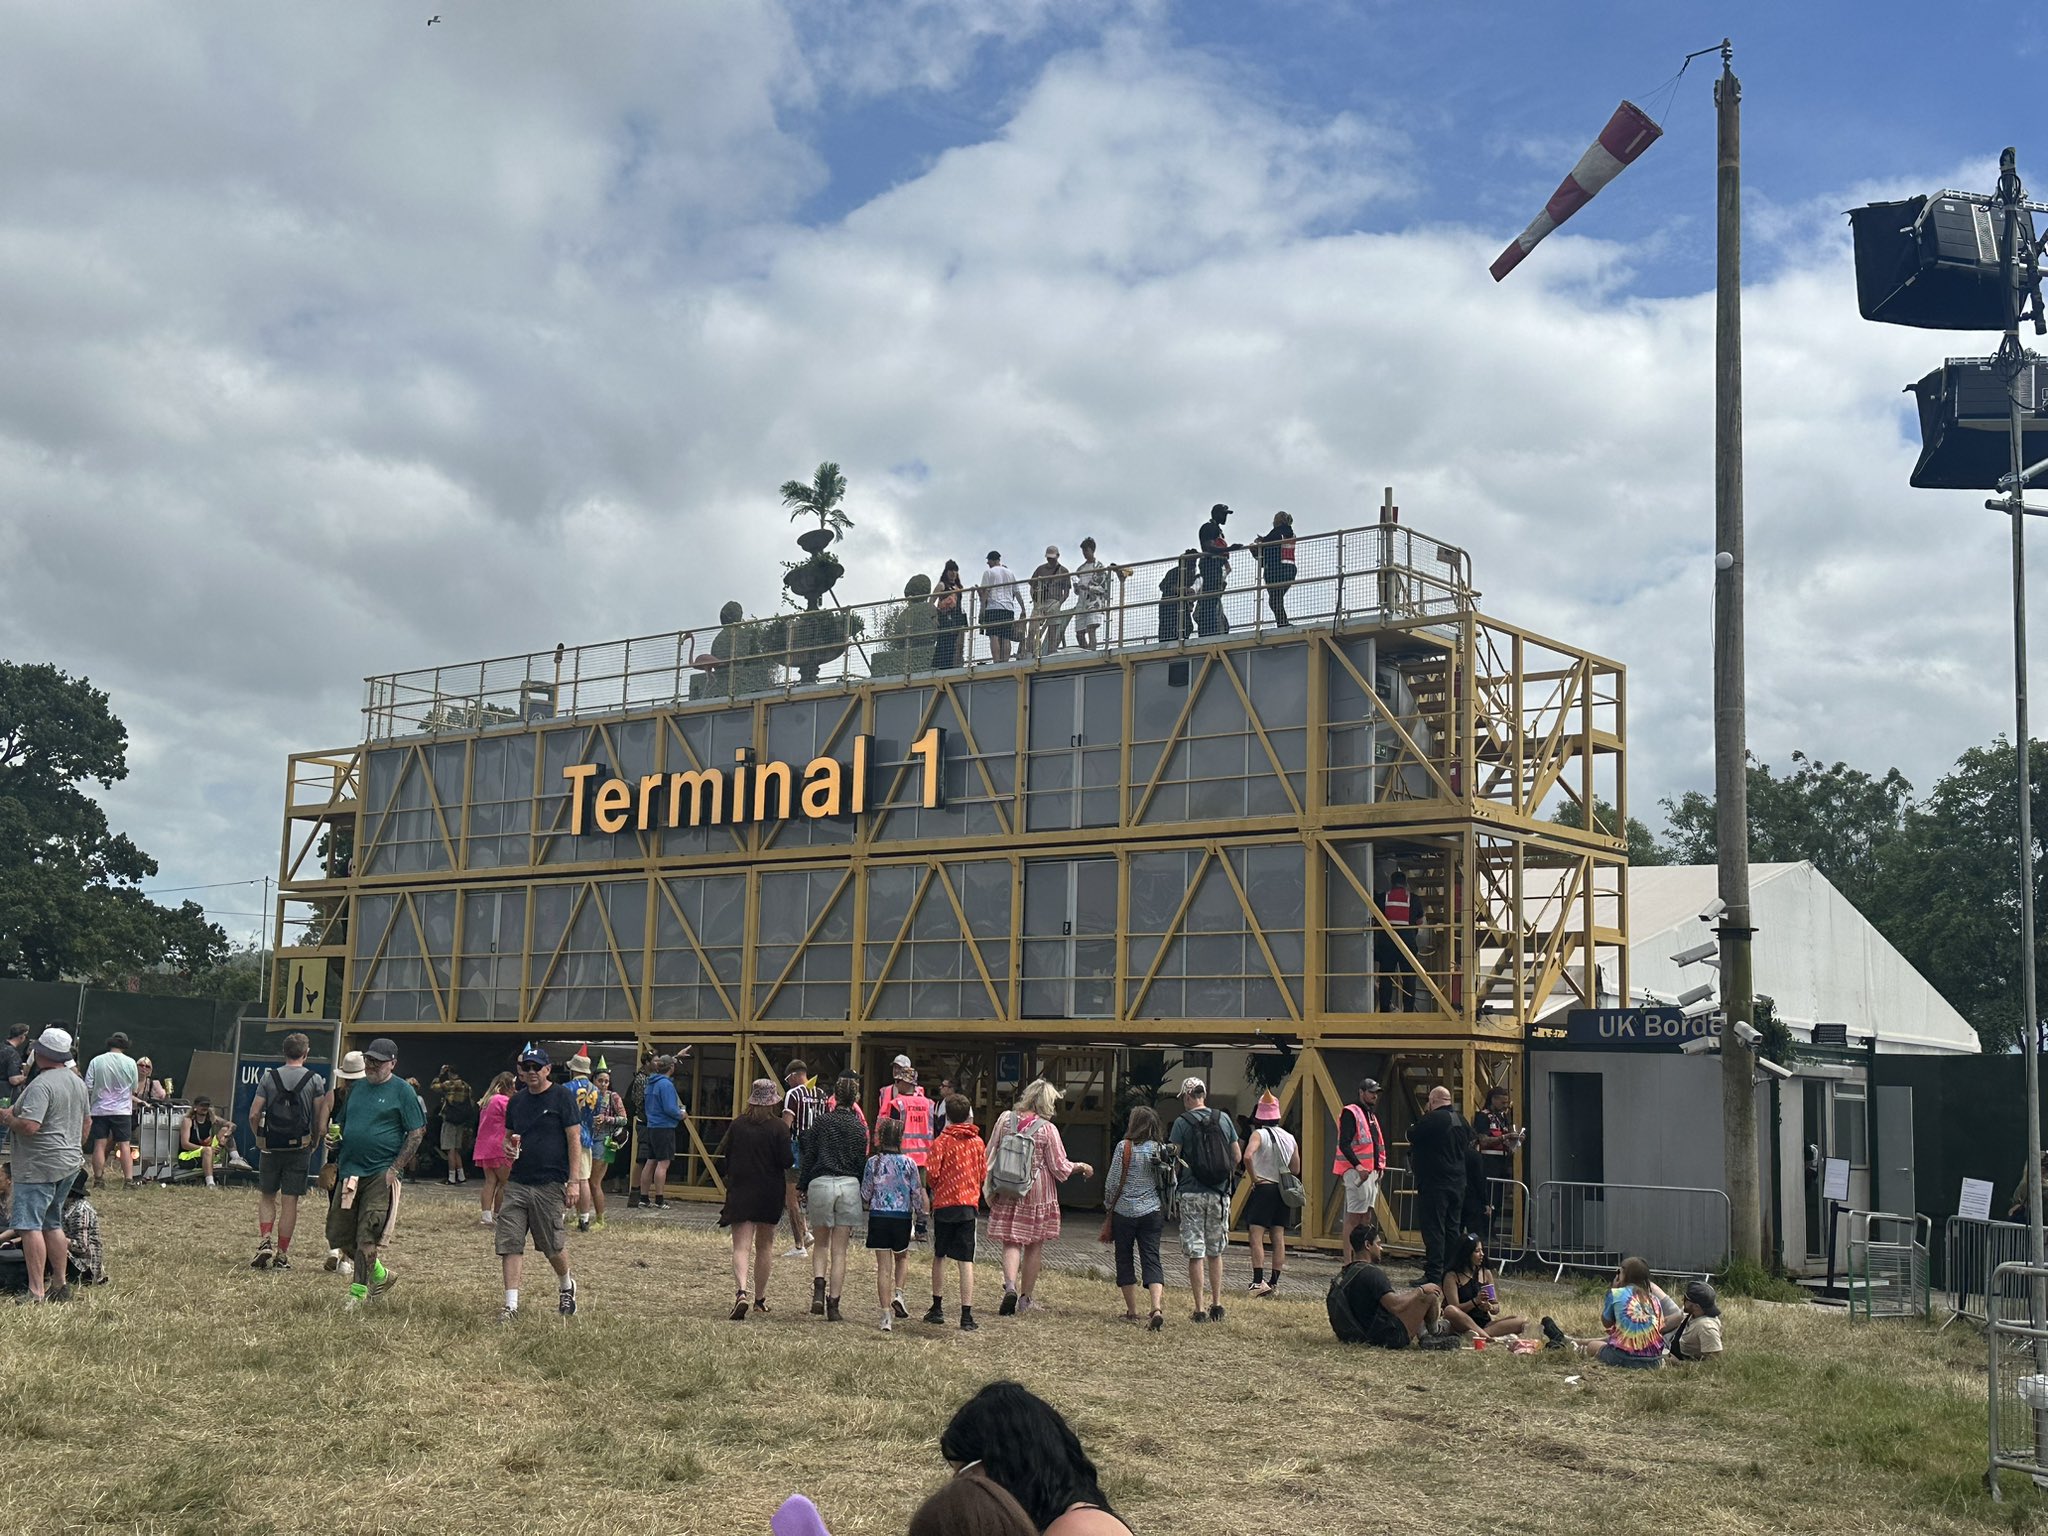 Fans are convinced this installation at Glasto has been created by Banksy